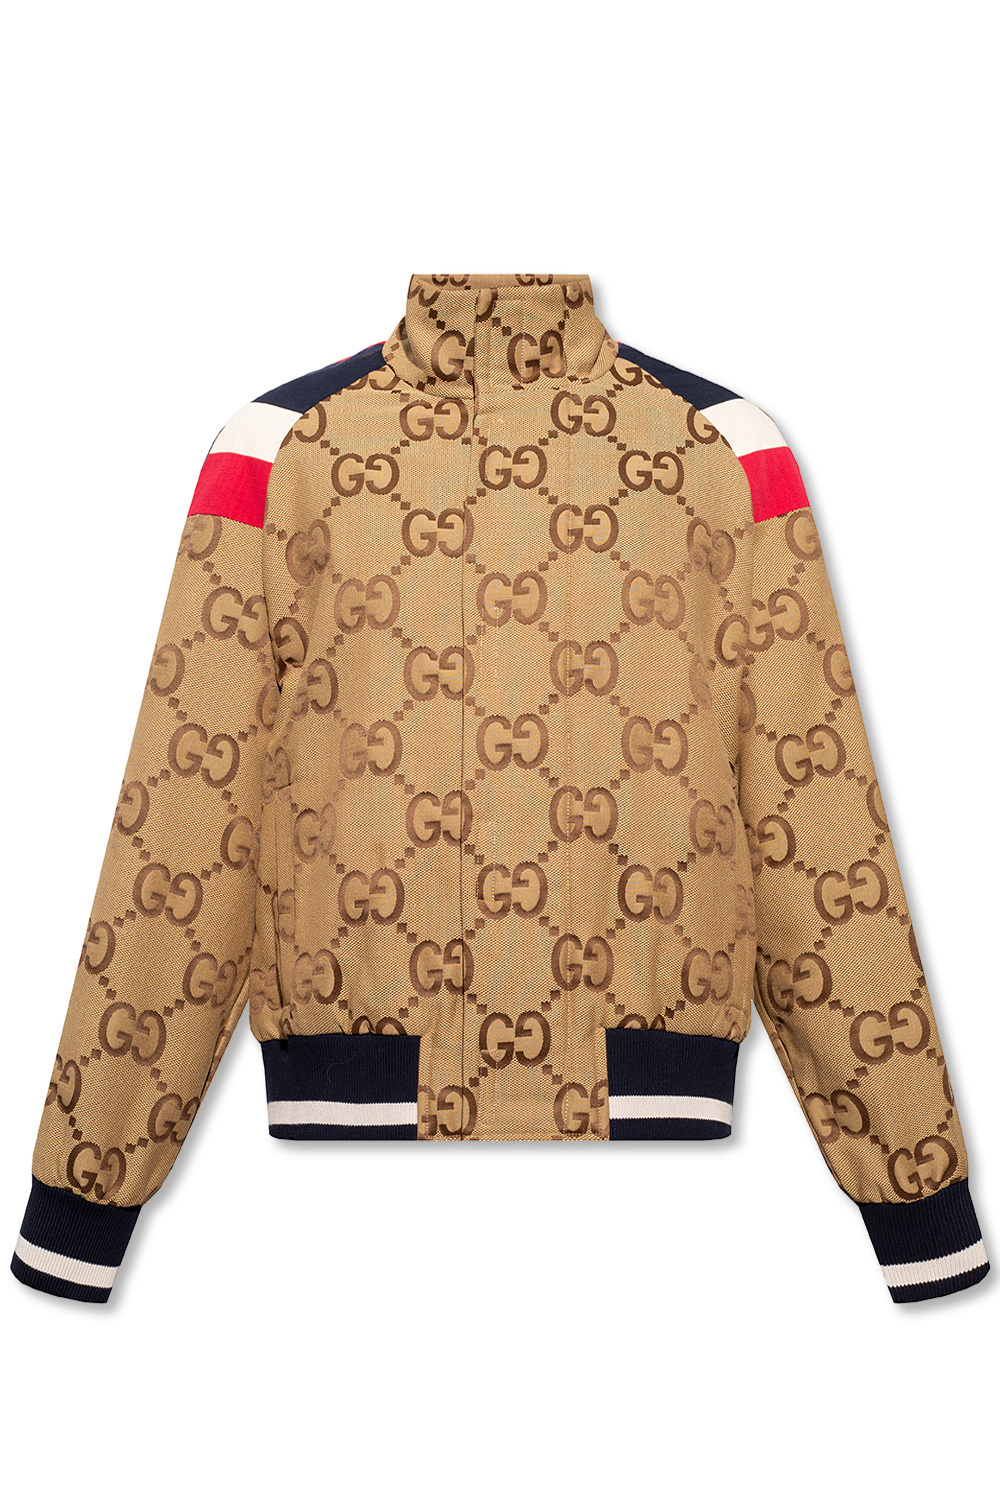 IetpShops Armenia - Bomber jacket from the 'Gucci Tiger 